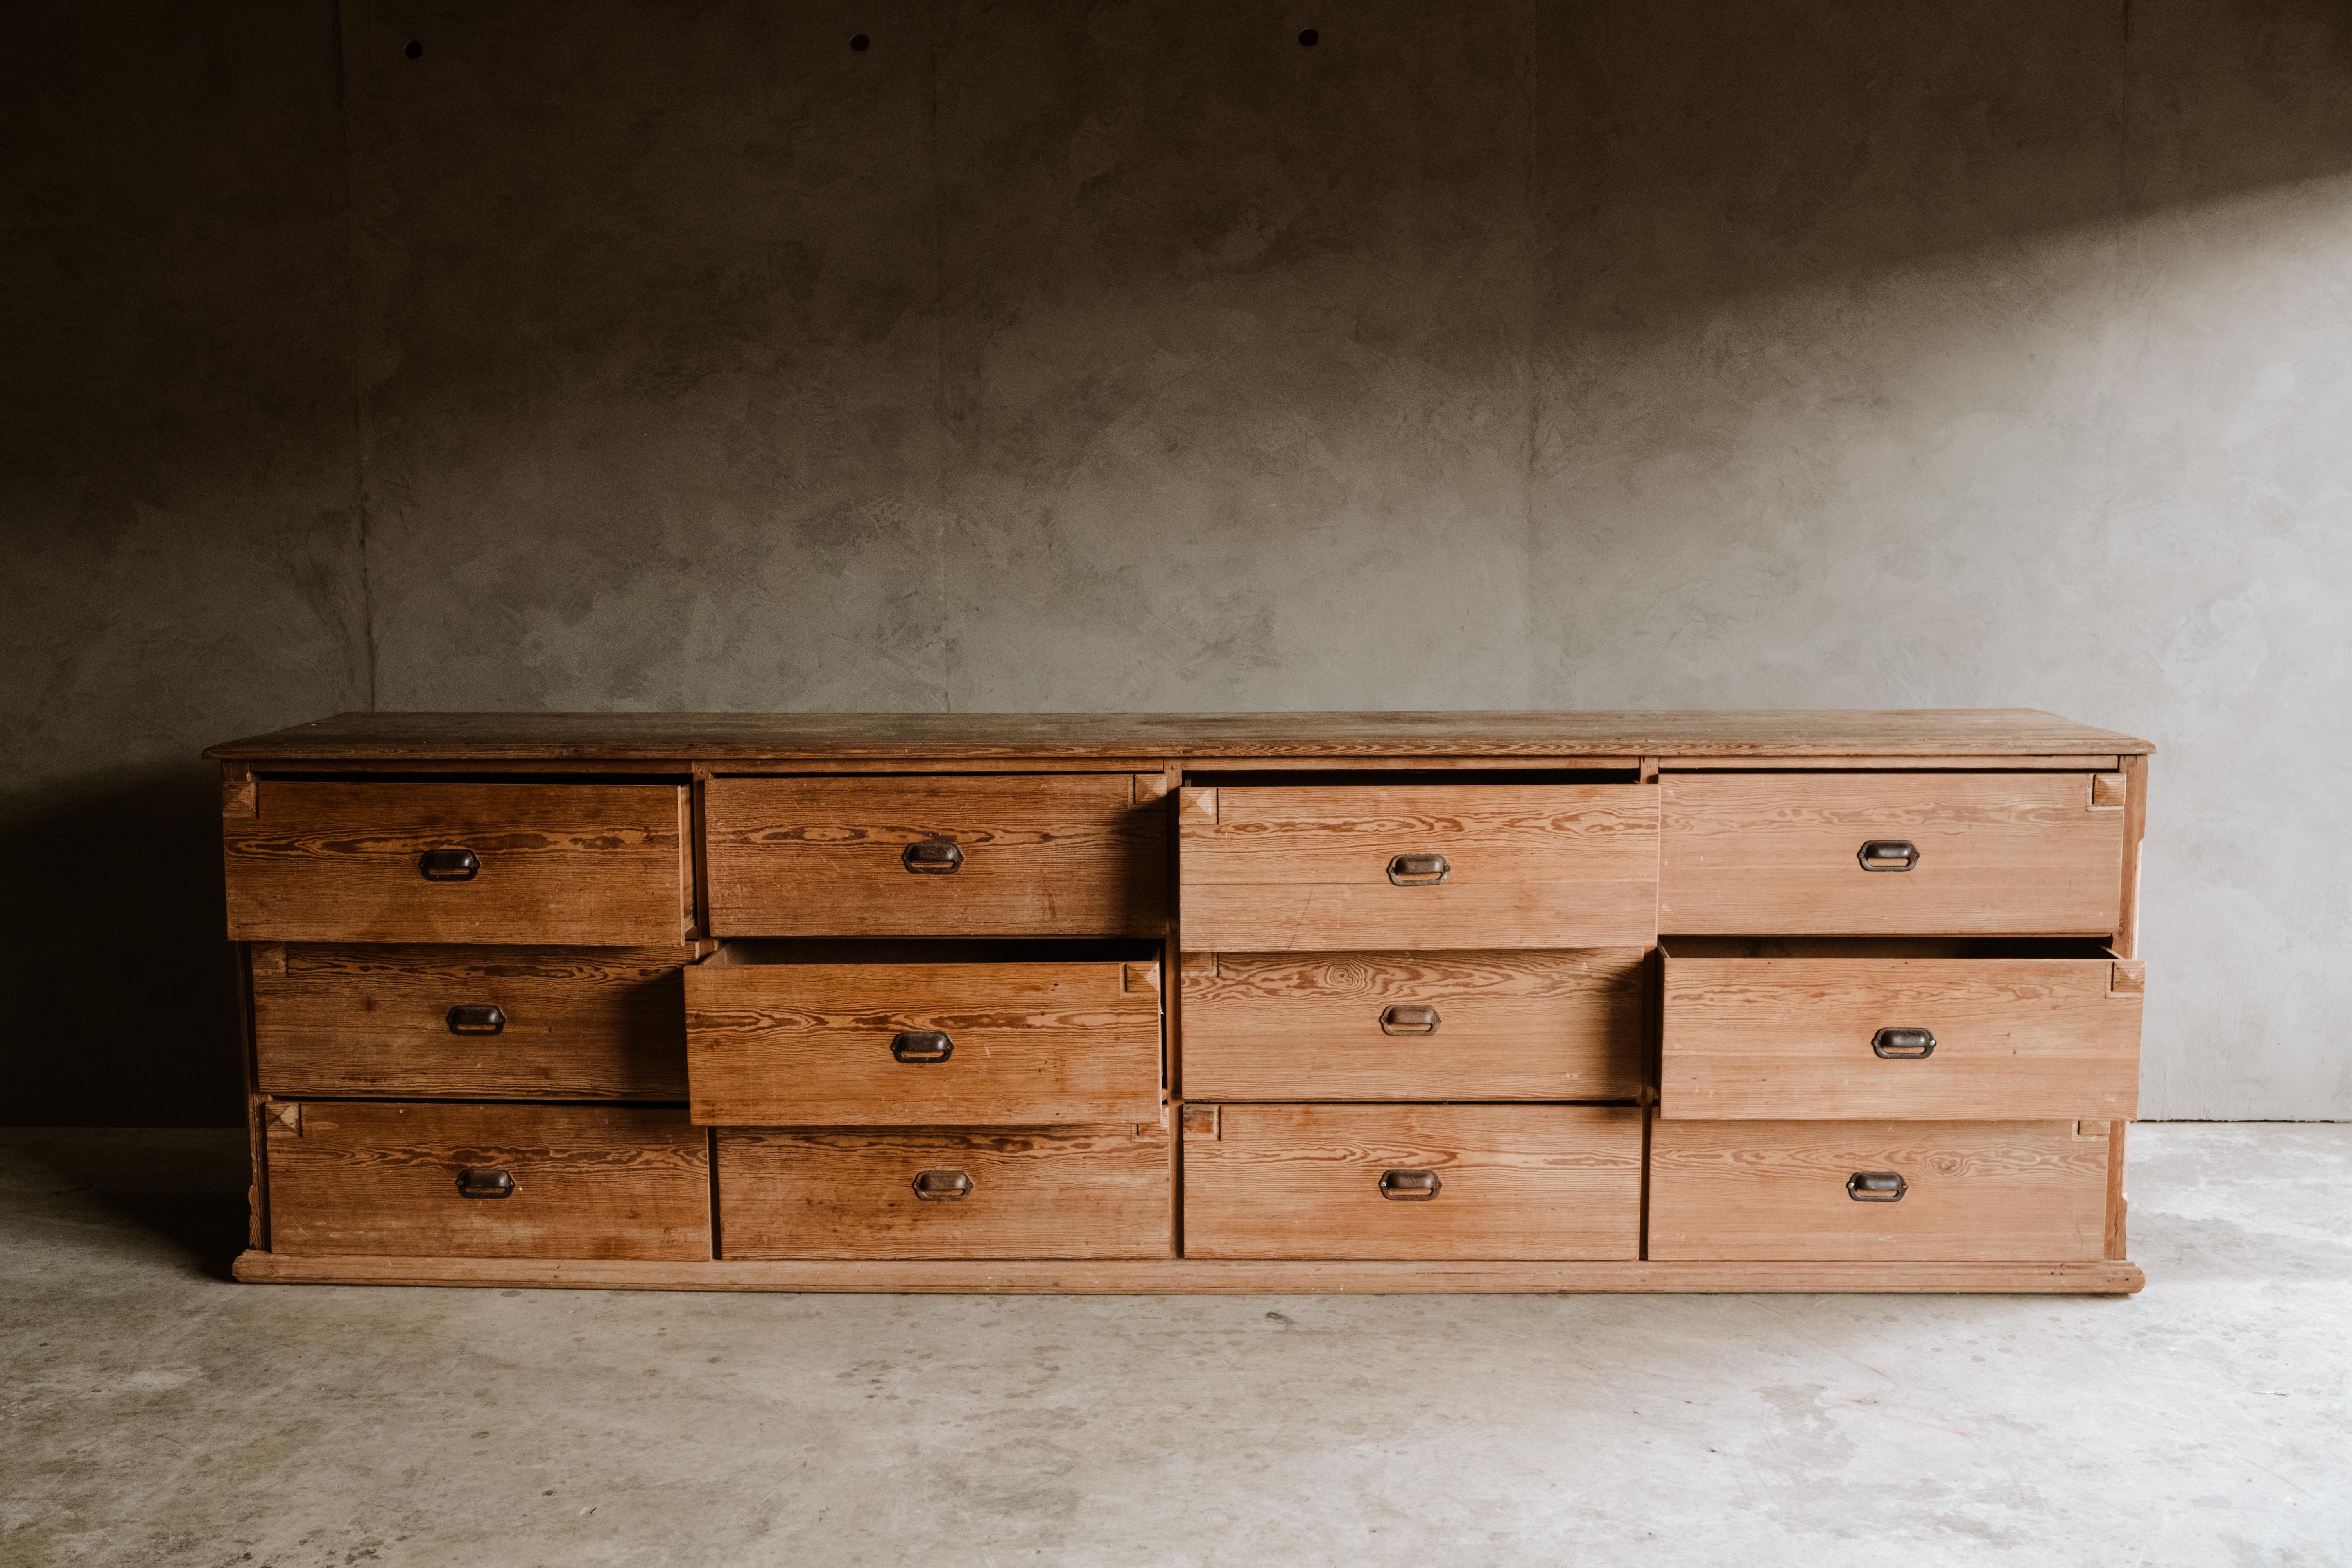 Large pine chest of drawers from France, Circa 1950. Solid oak construction with original hardware. Fantastic wear and patina.